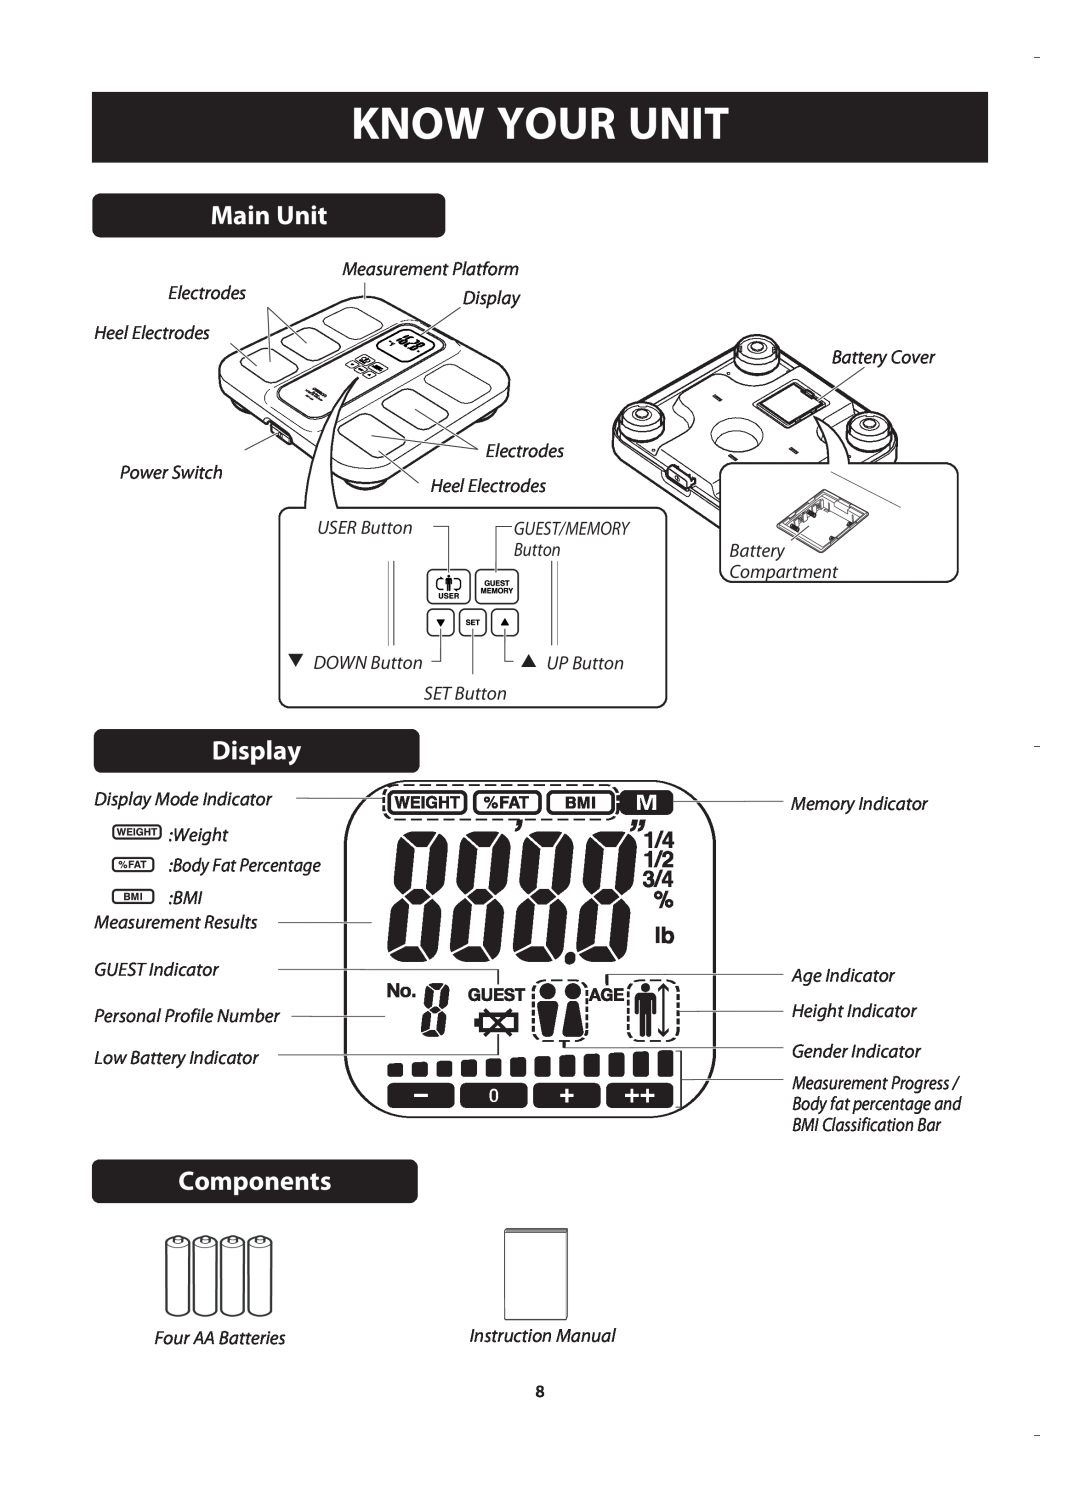 Omron HBF-400 instruction manual Know Your Unit, Main Unit, Display, Components 